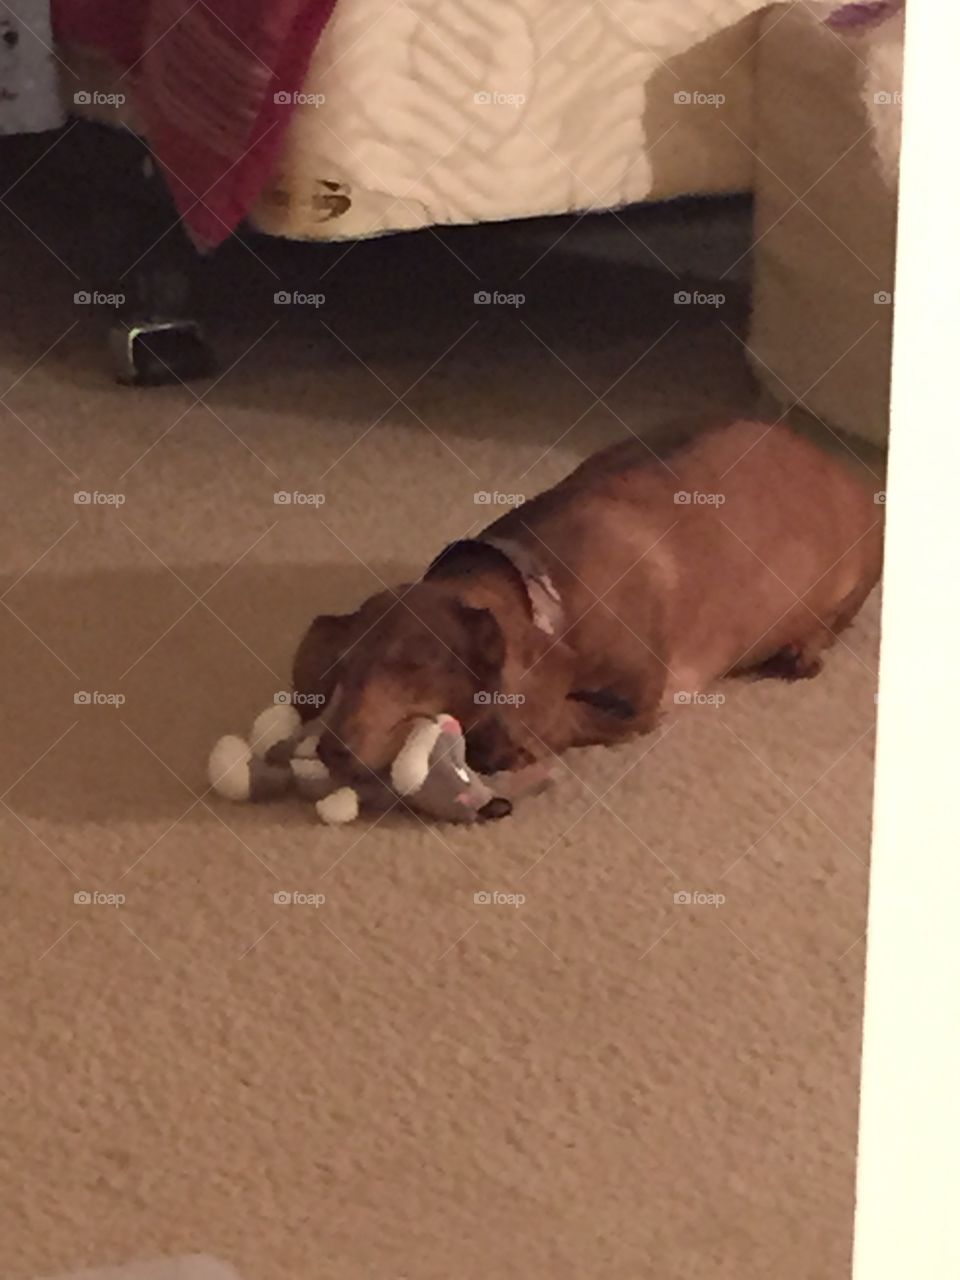 I'm tired buddy. After chasing her favorite toy around she decided to fall asleep on her favorite squeaking toy